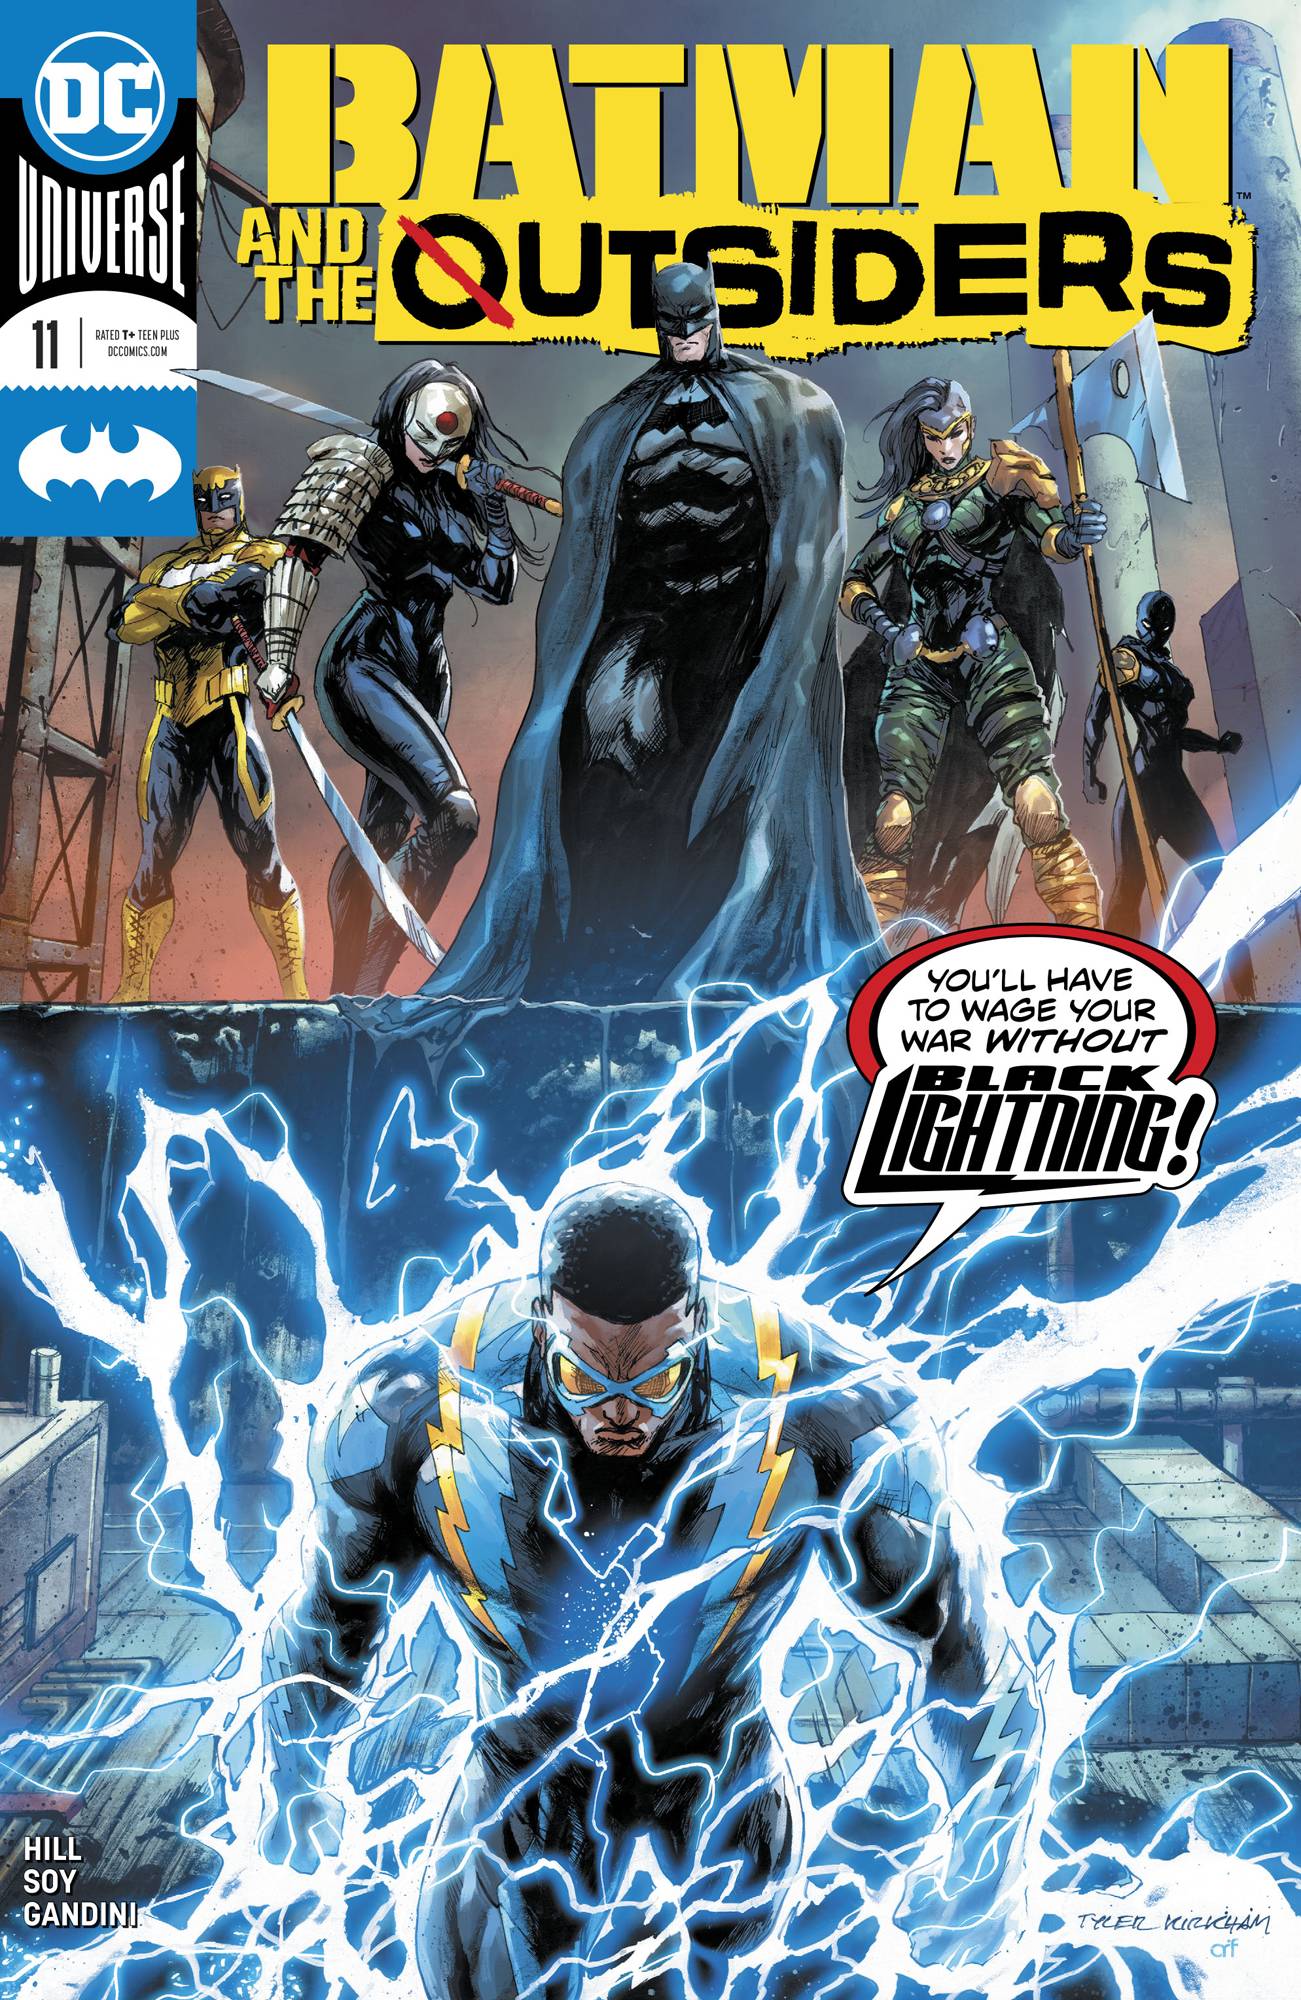 BATMAN AND THE OUTSIDERS #11